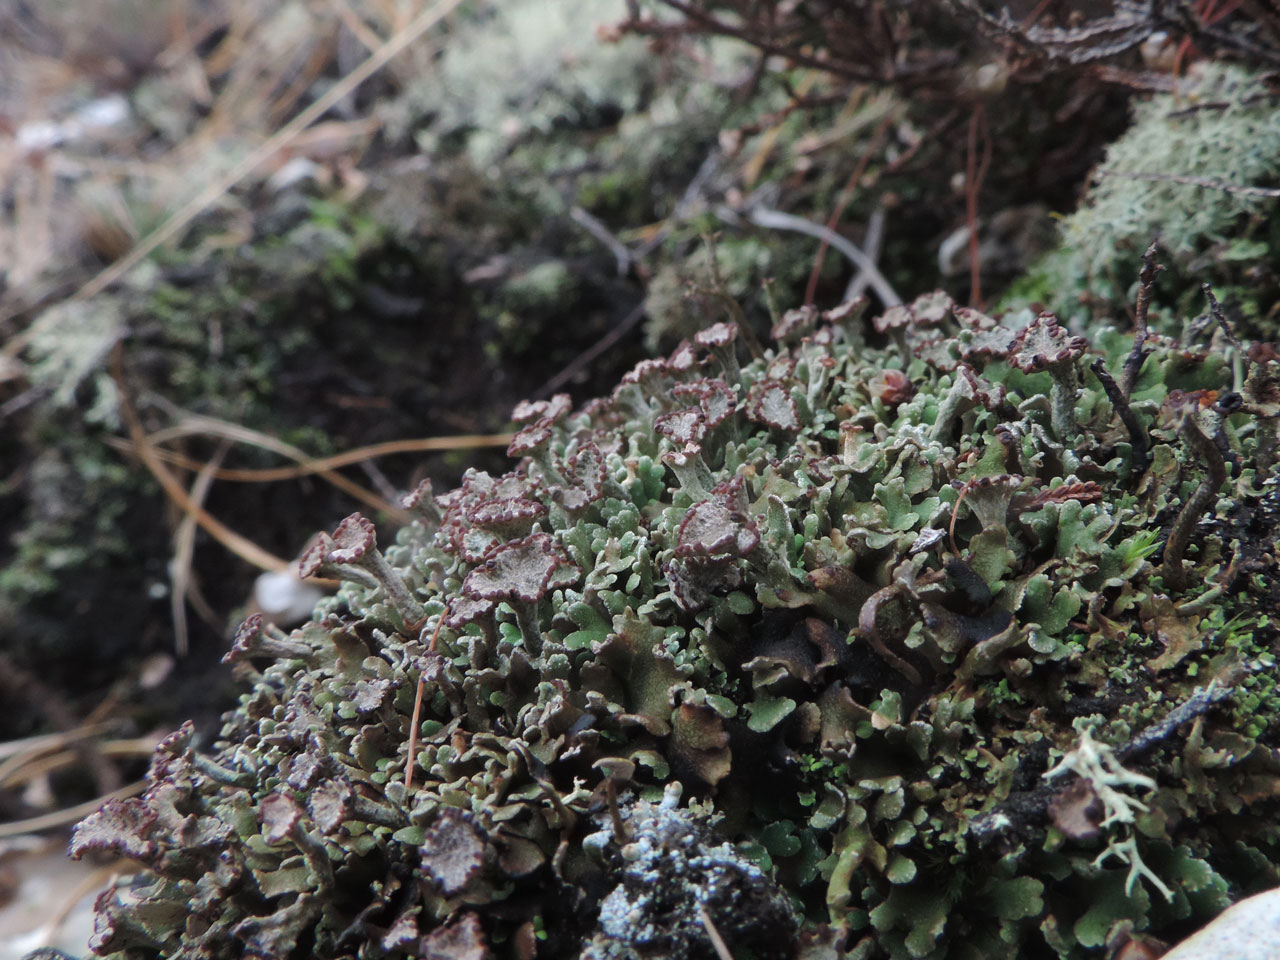 Cladonia firma, podetia, Great Witch,New Forest